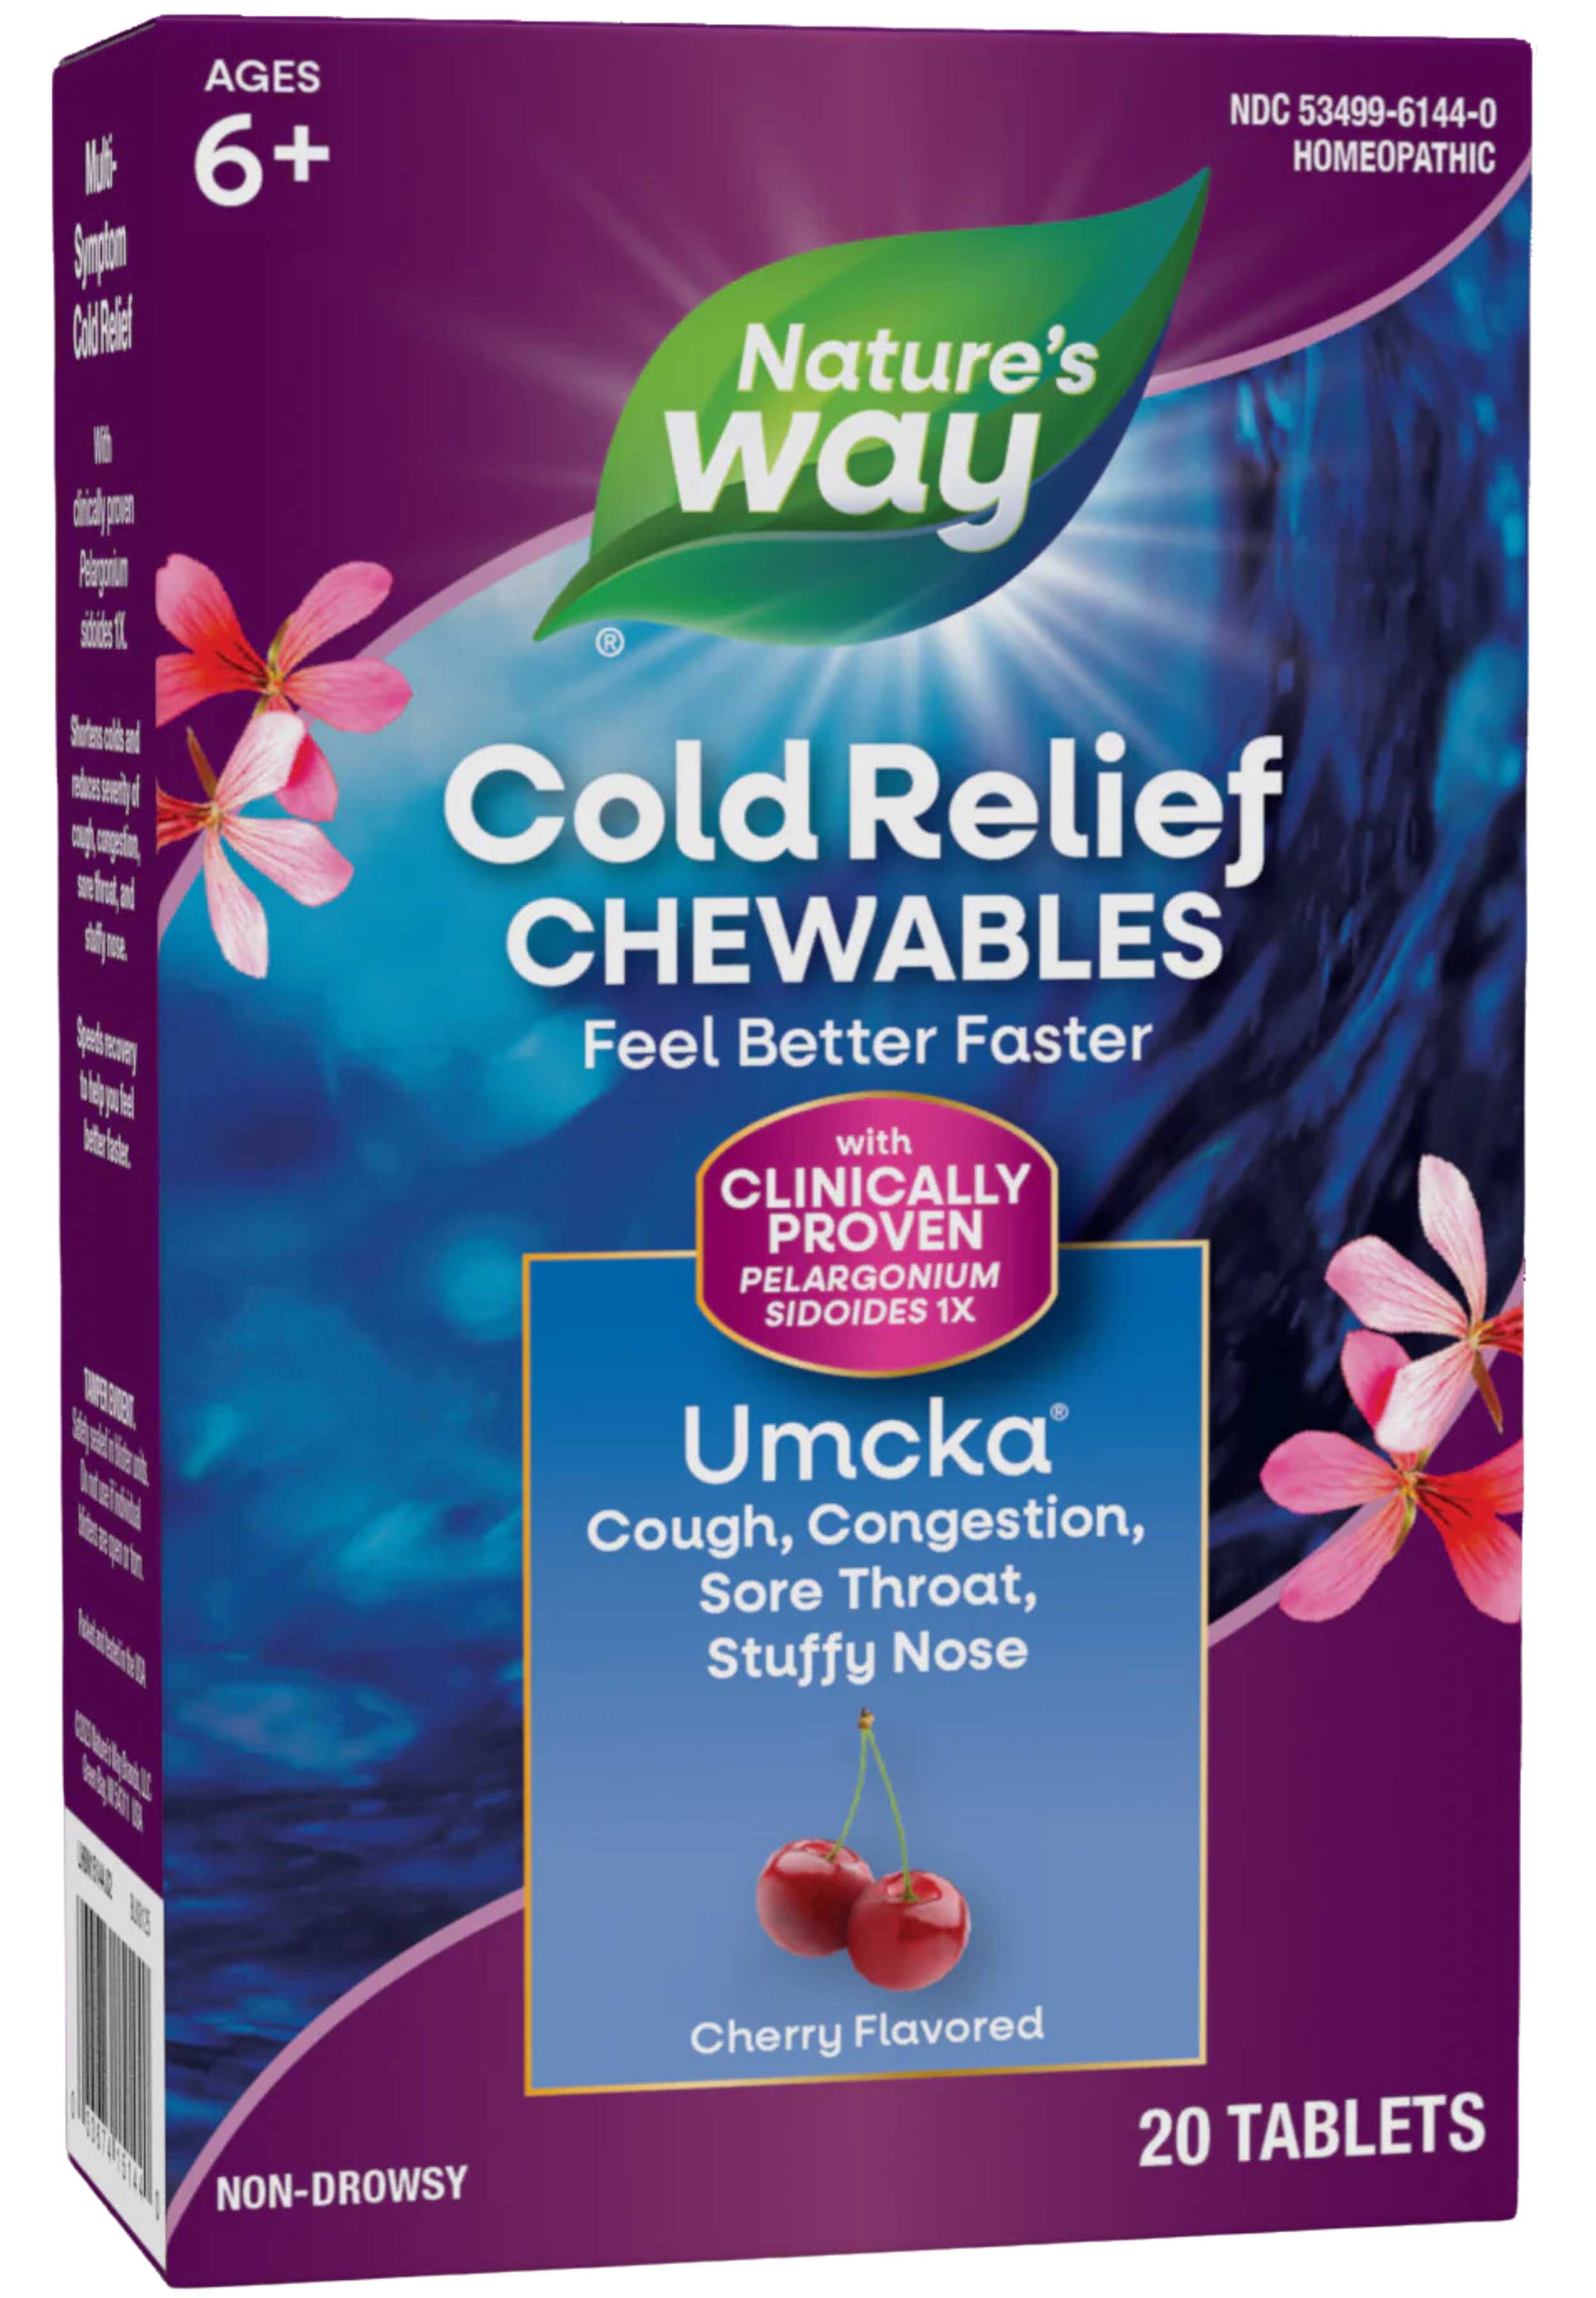 Nature's Way Umcka ColdCare Relief Chewable